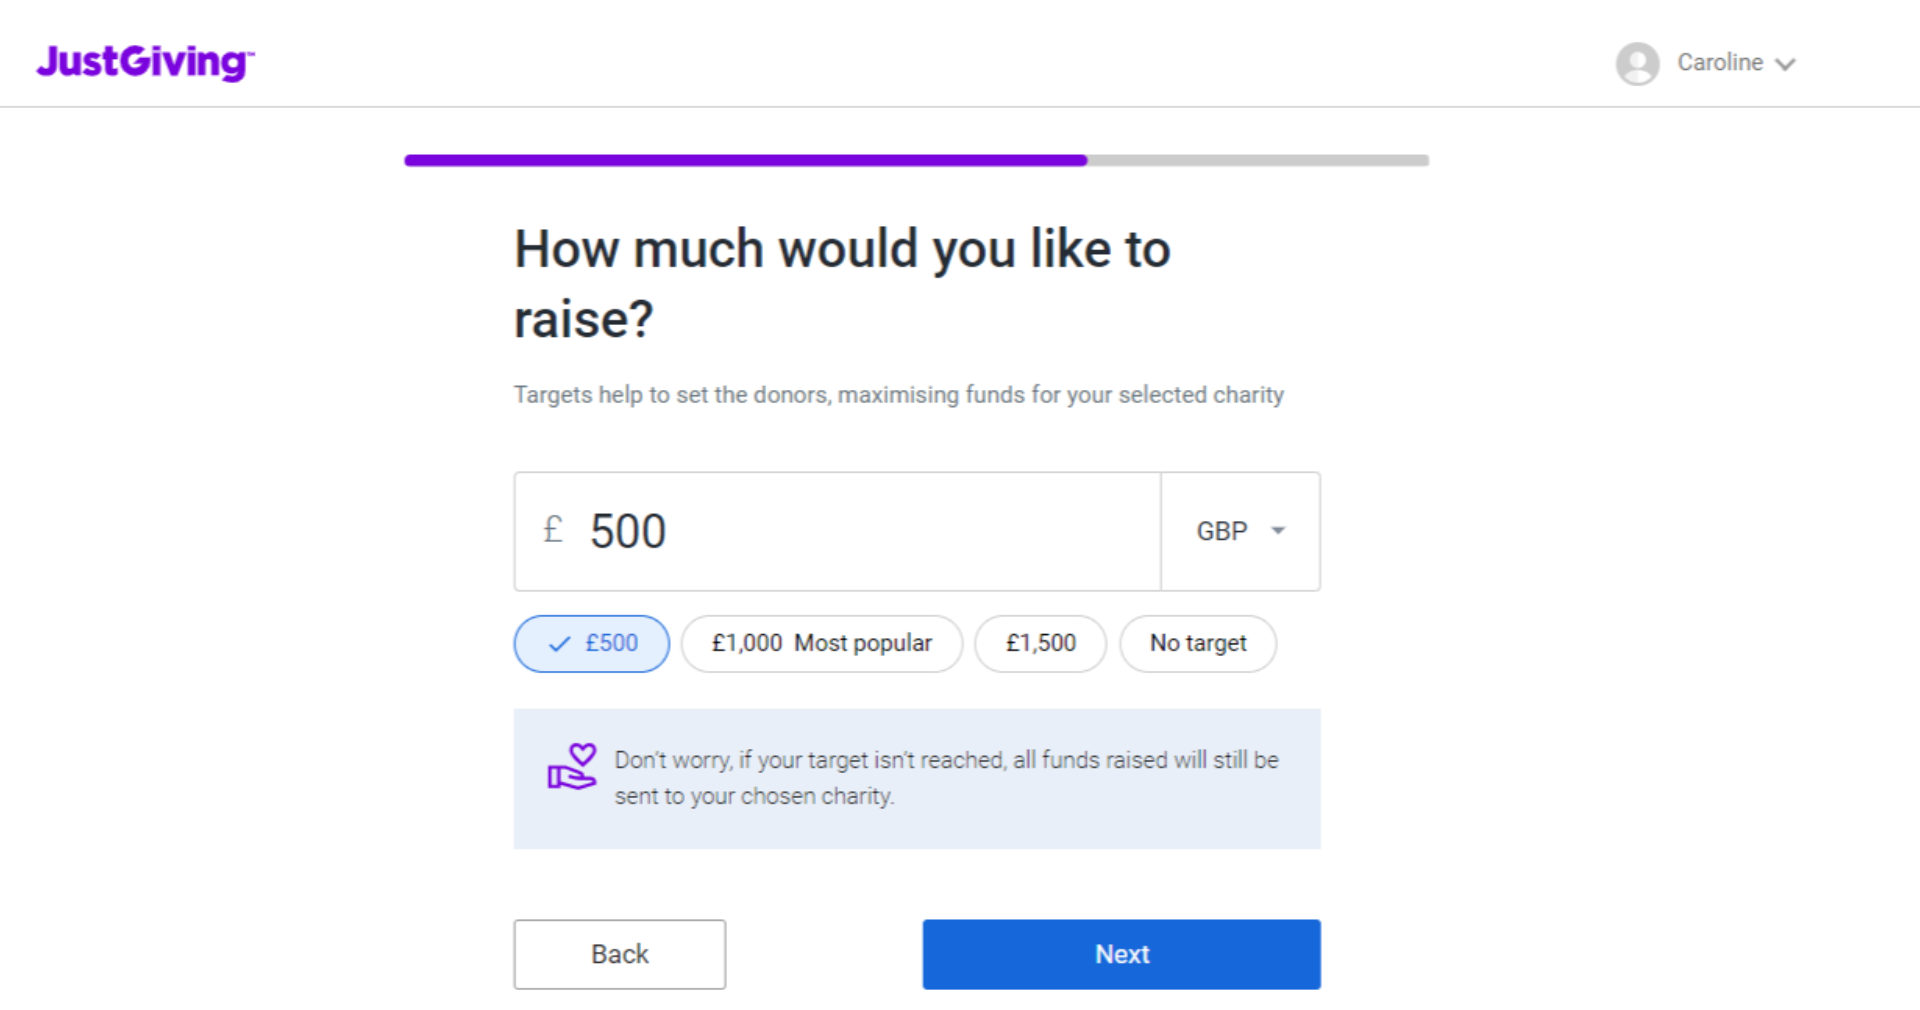 A guide to setting up a JustGiving page